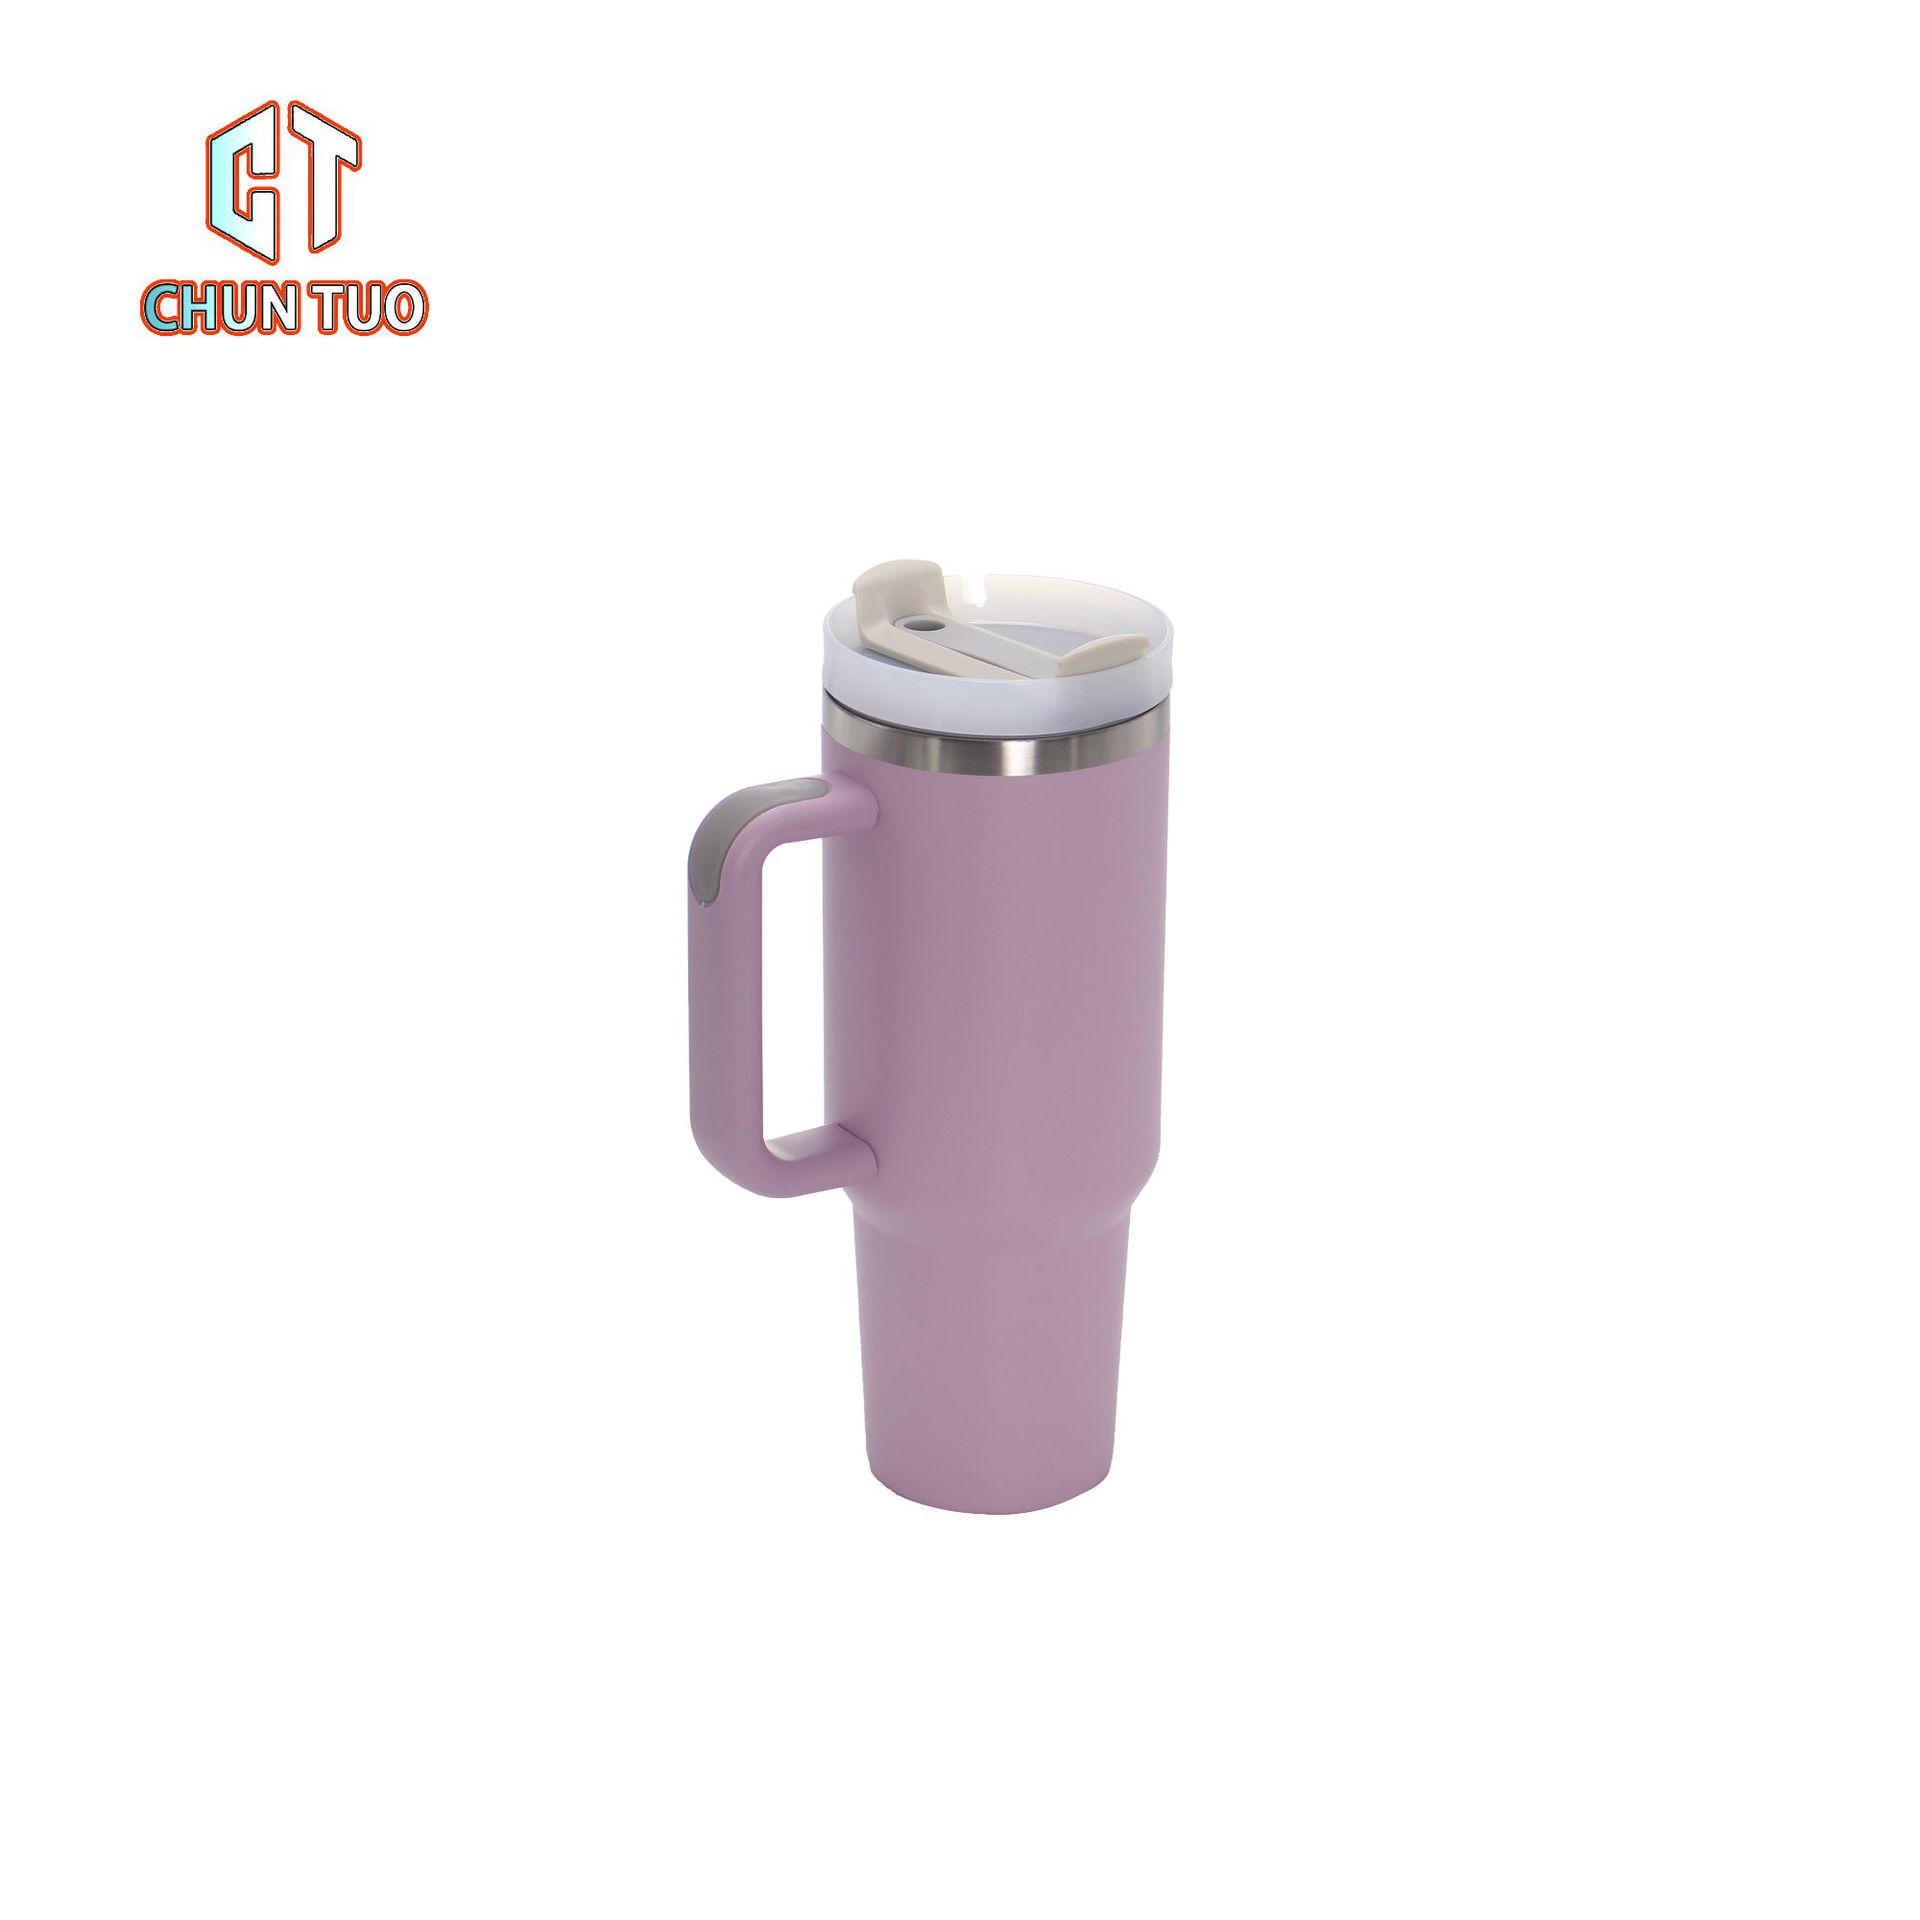 NEW 2.0 40oz stainless steel tumbler with handle lid straw big capacity beer mug water bottle powder coating outdoor camping cup Second generation